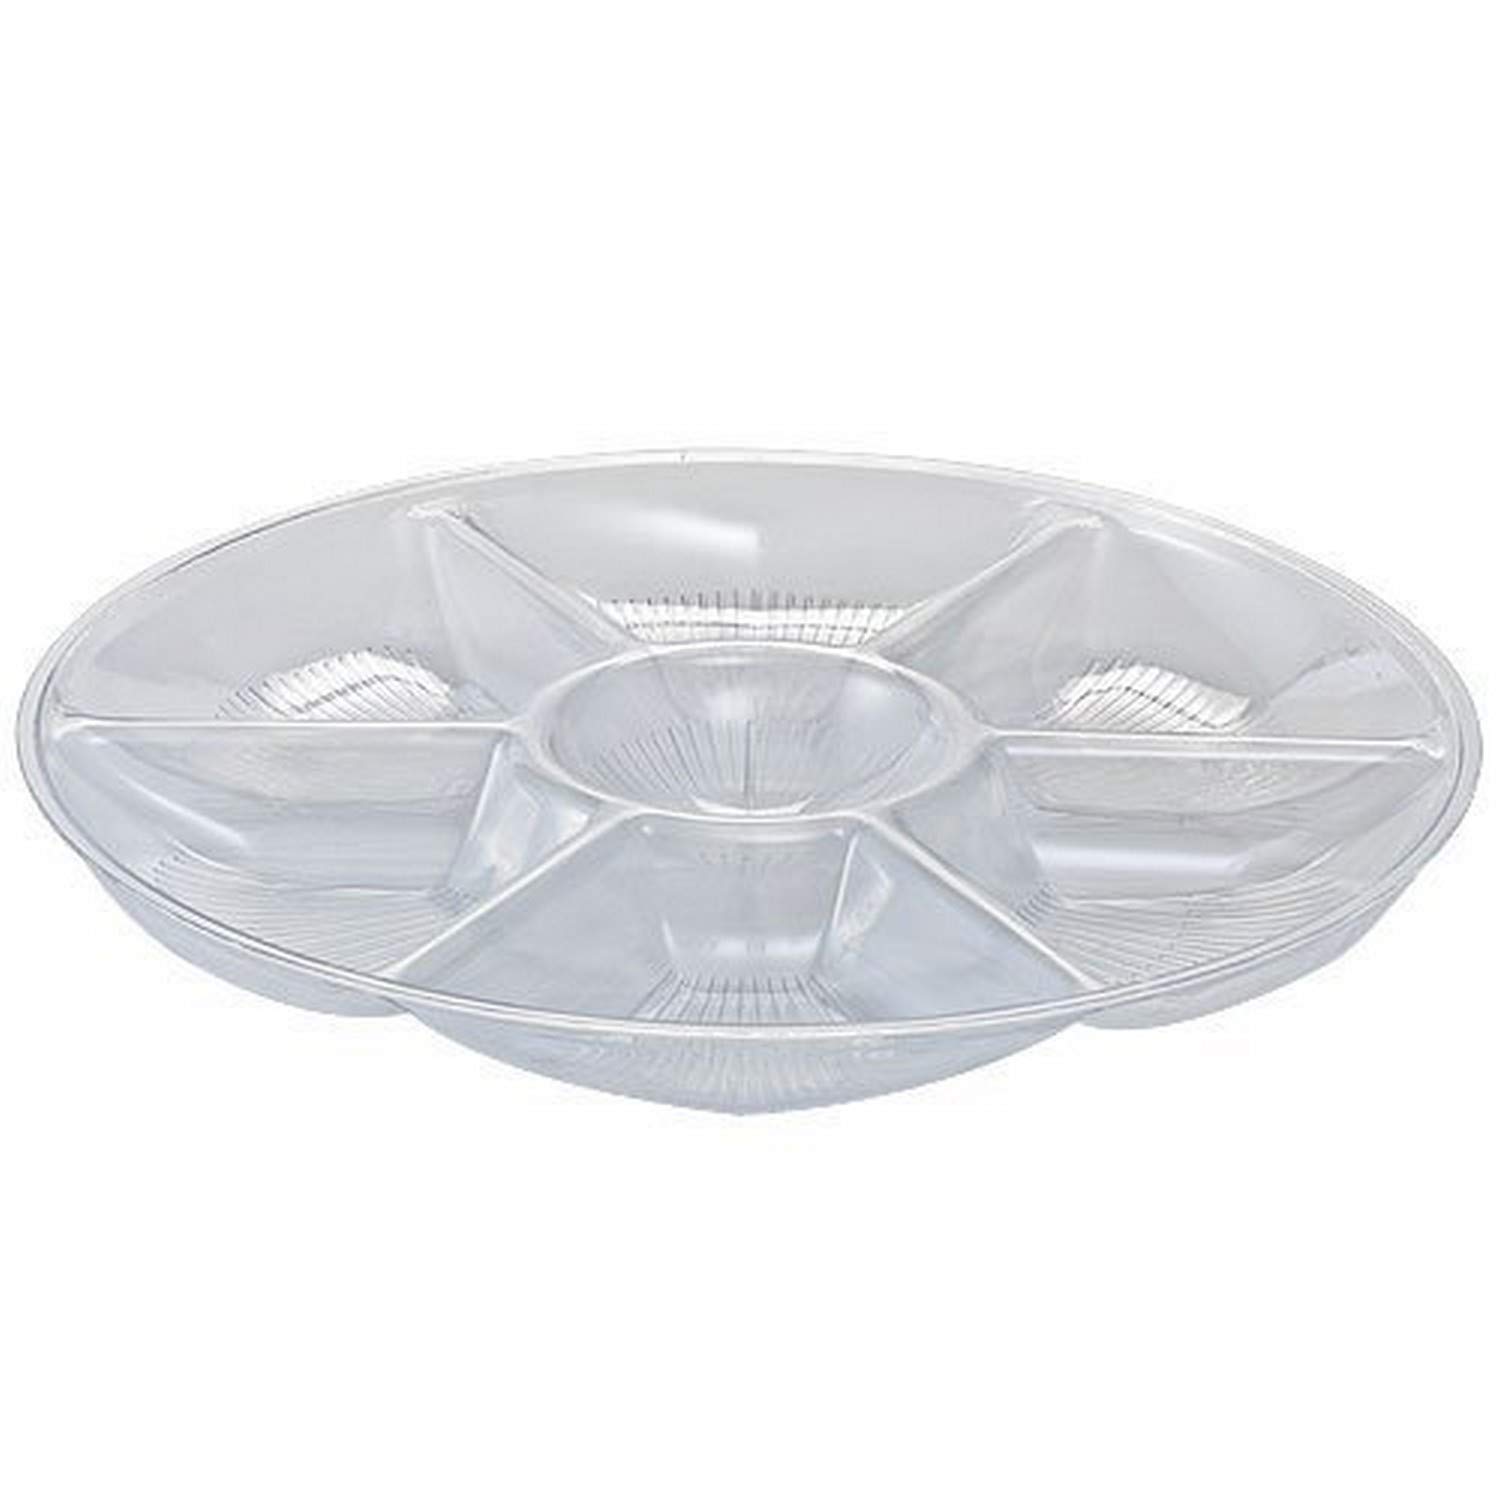 Party Dimensions 7-Compartment Platter Tray-14 | Clear | 1 Pc Plastic Tray, 14 inches